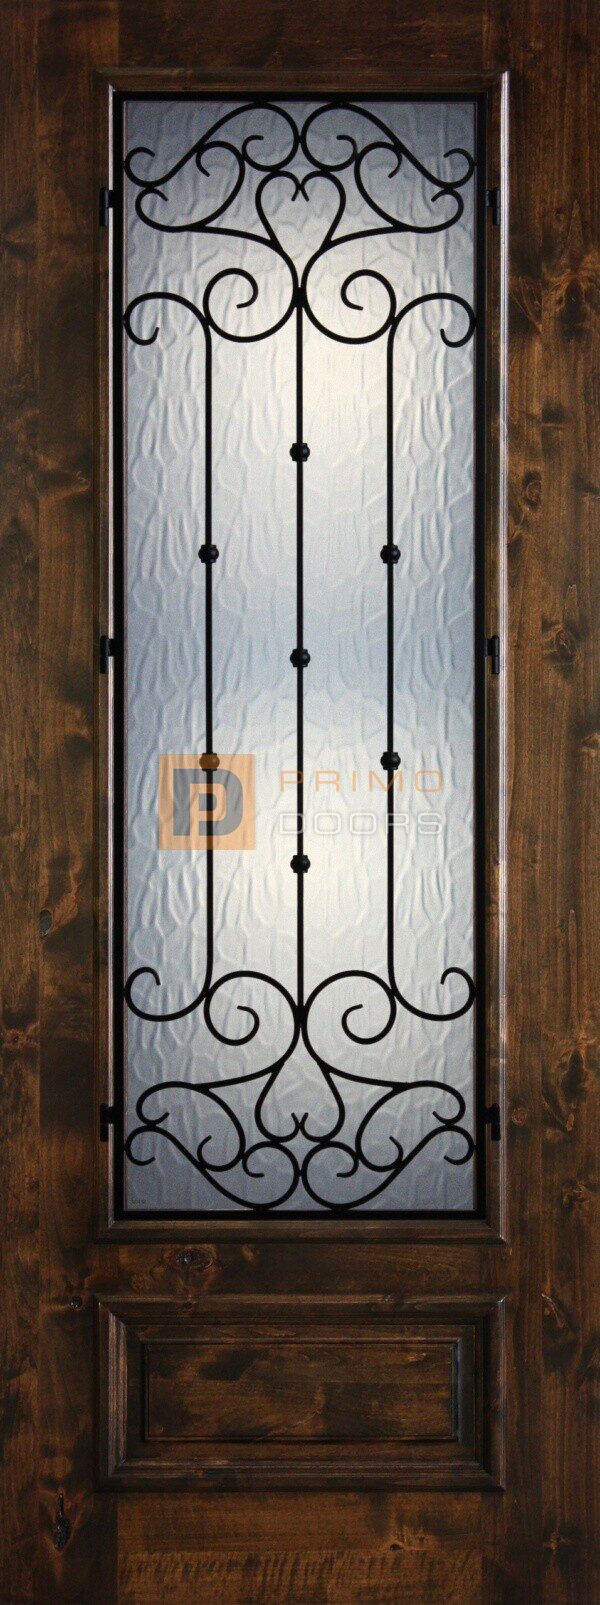 8′ 3/4 Lite Knotty Alder Decorative Glass with Iron Grill Single Iron Front Door – PD KA 3080-34 CORD